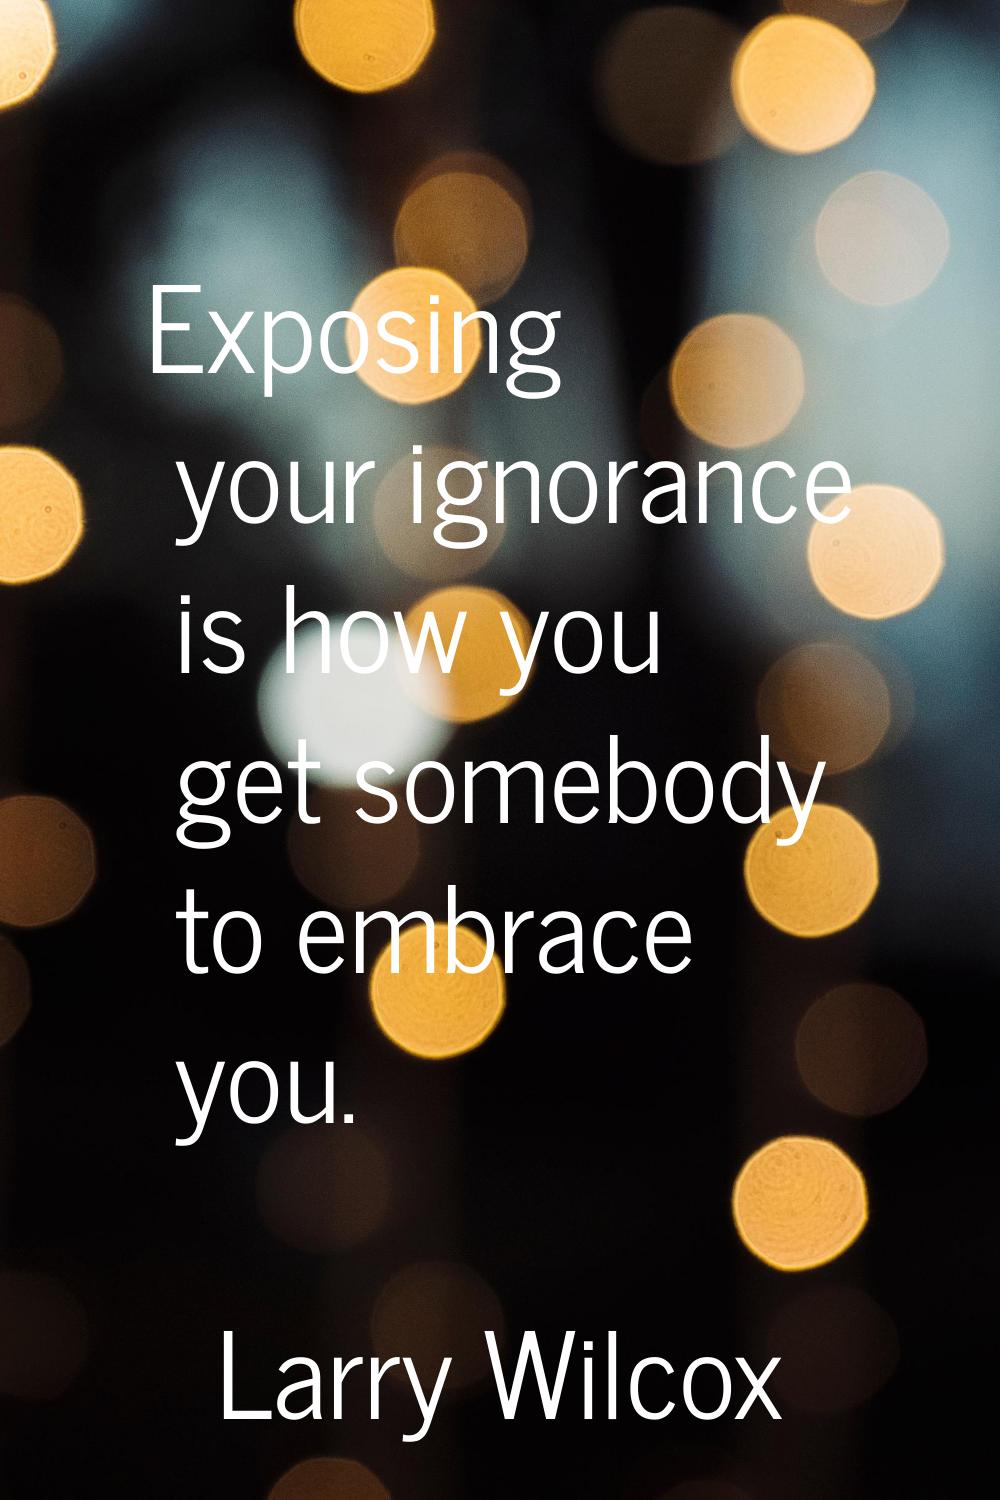 Exposing your ignorance is how you get somebody to embrace you.